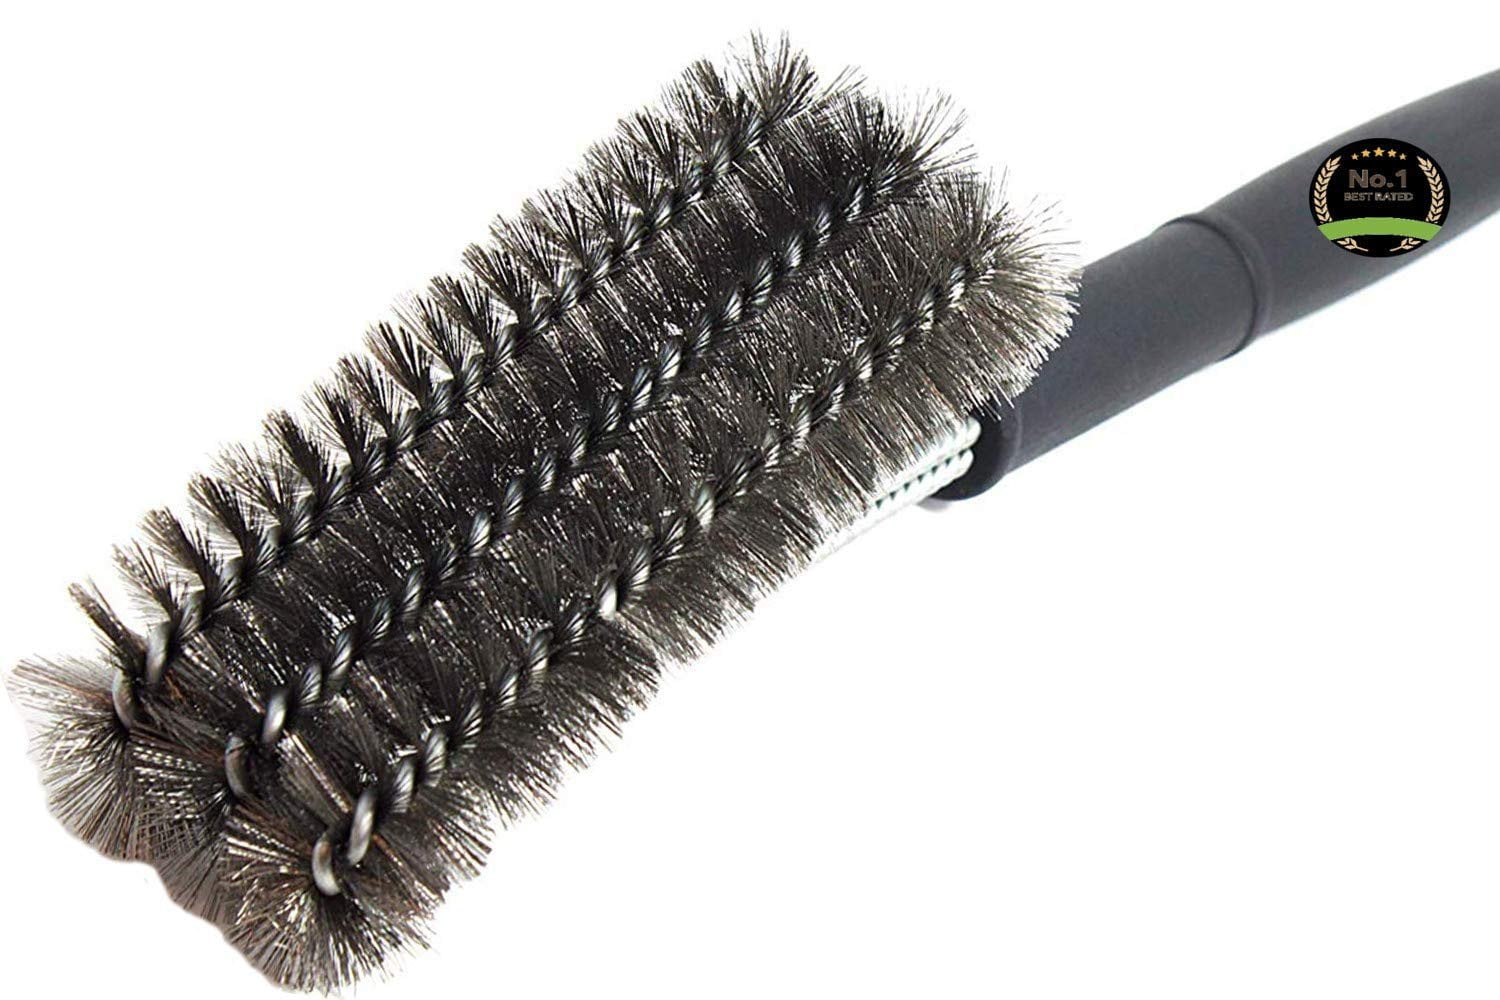  Grill Daddy GD12952S Pro Grill Brush-Cleans BBQ